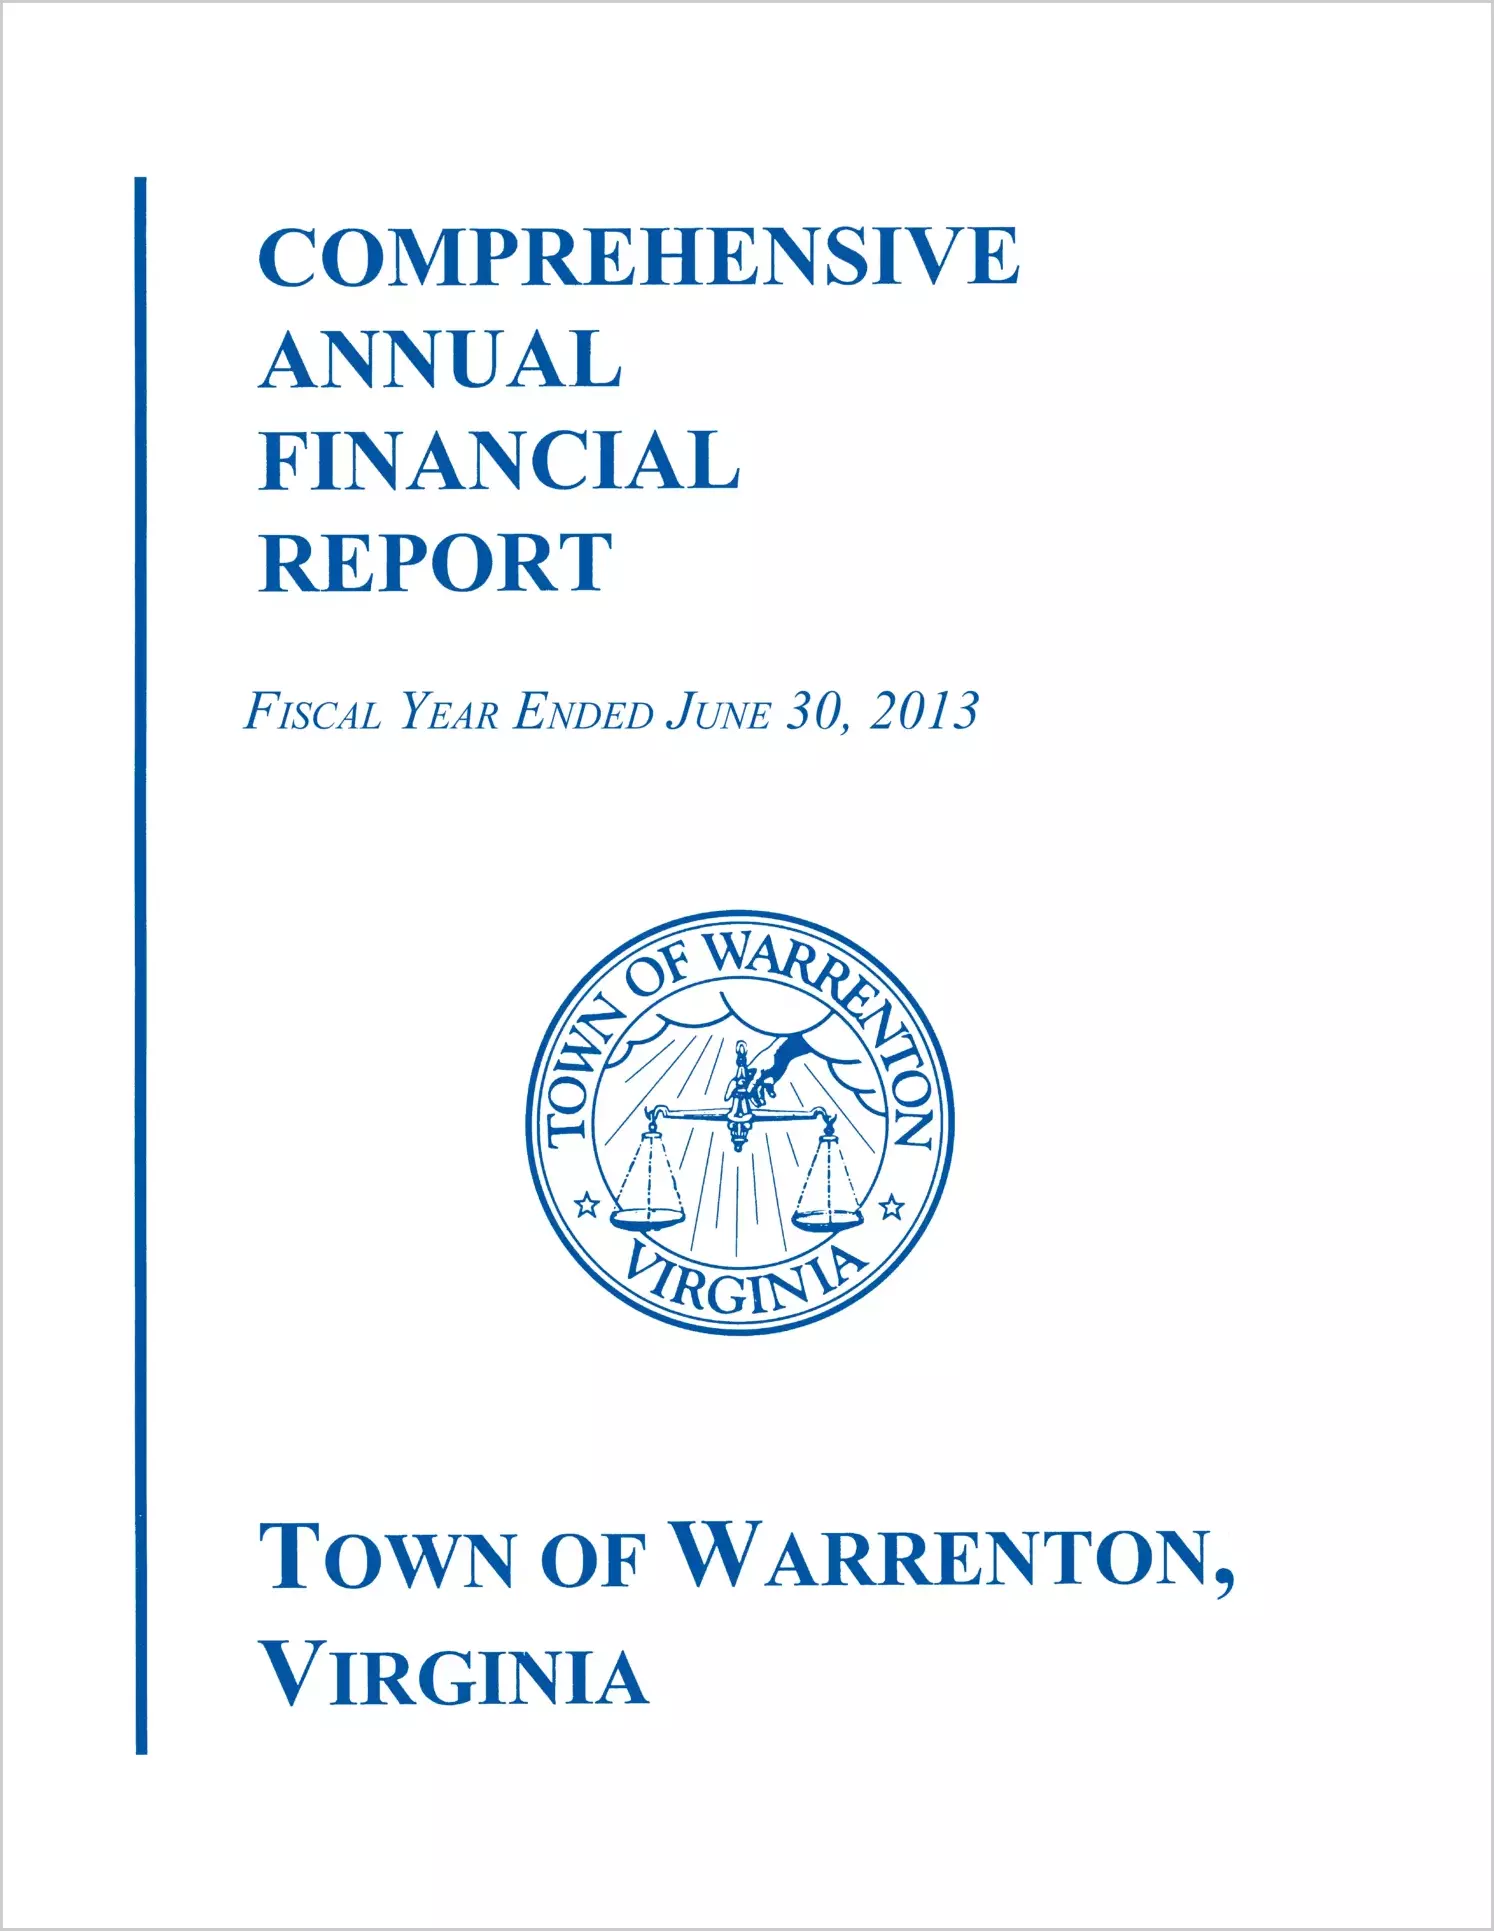 2013 Annual Financial Report for Town of Warrenton